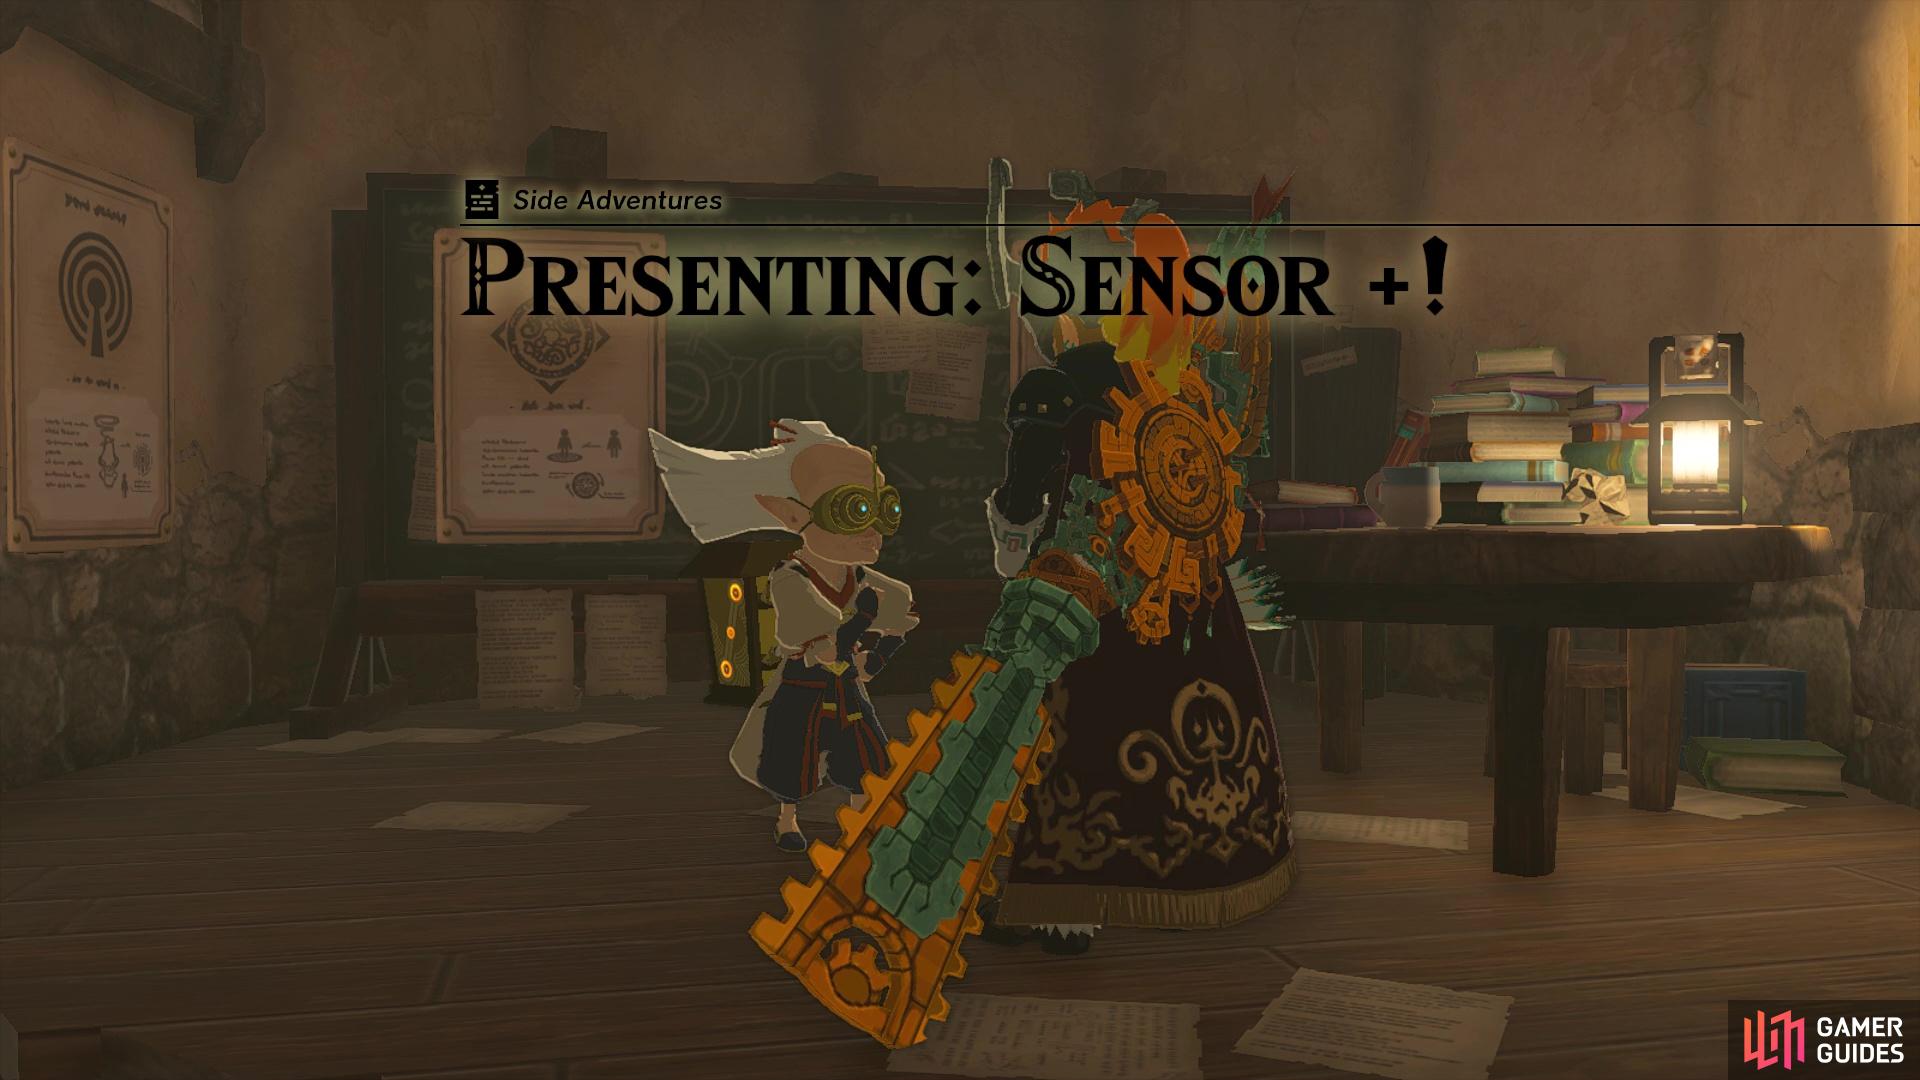 You can get the Sensor + quest at the same time as Travel Medallion and Hero’s Path Mode.